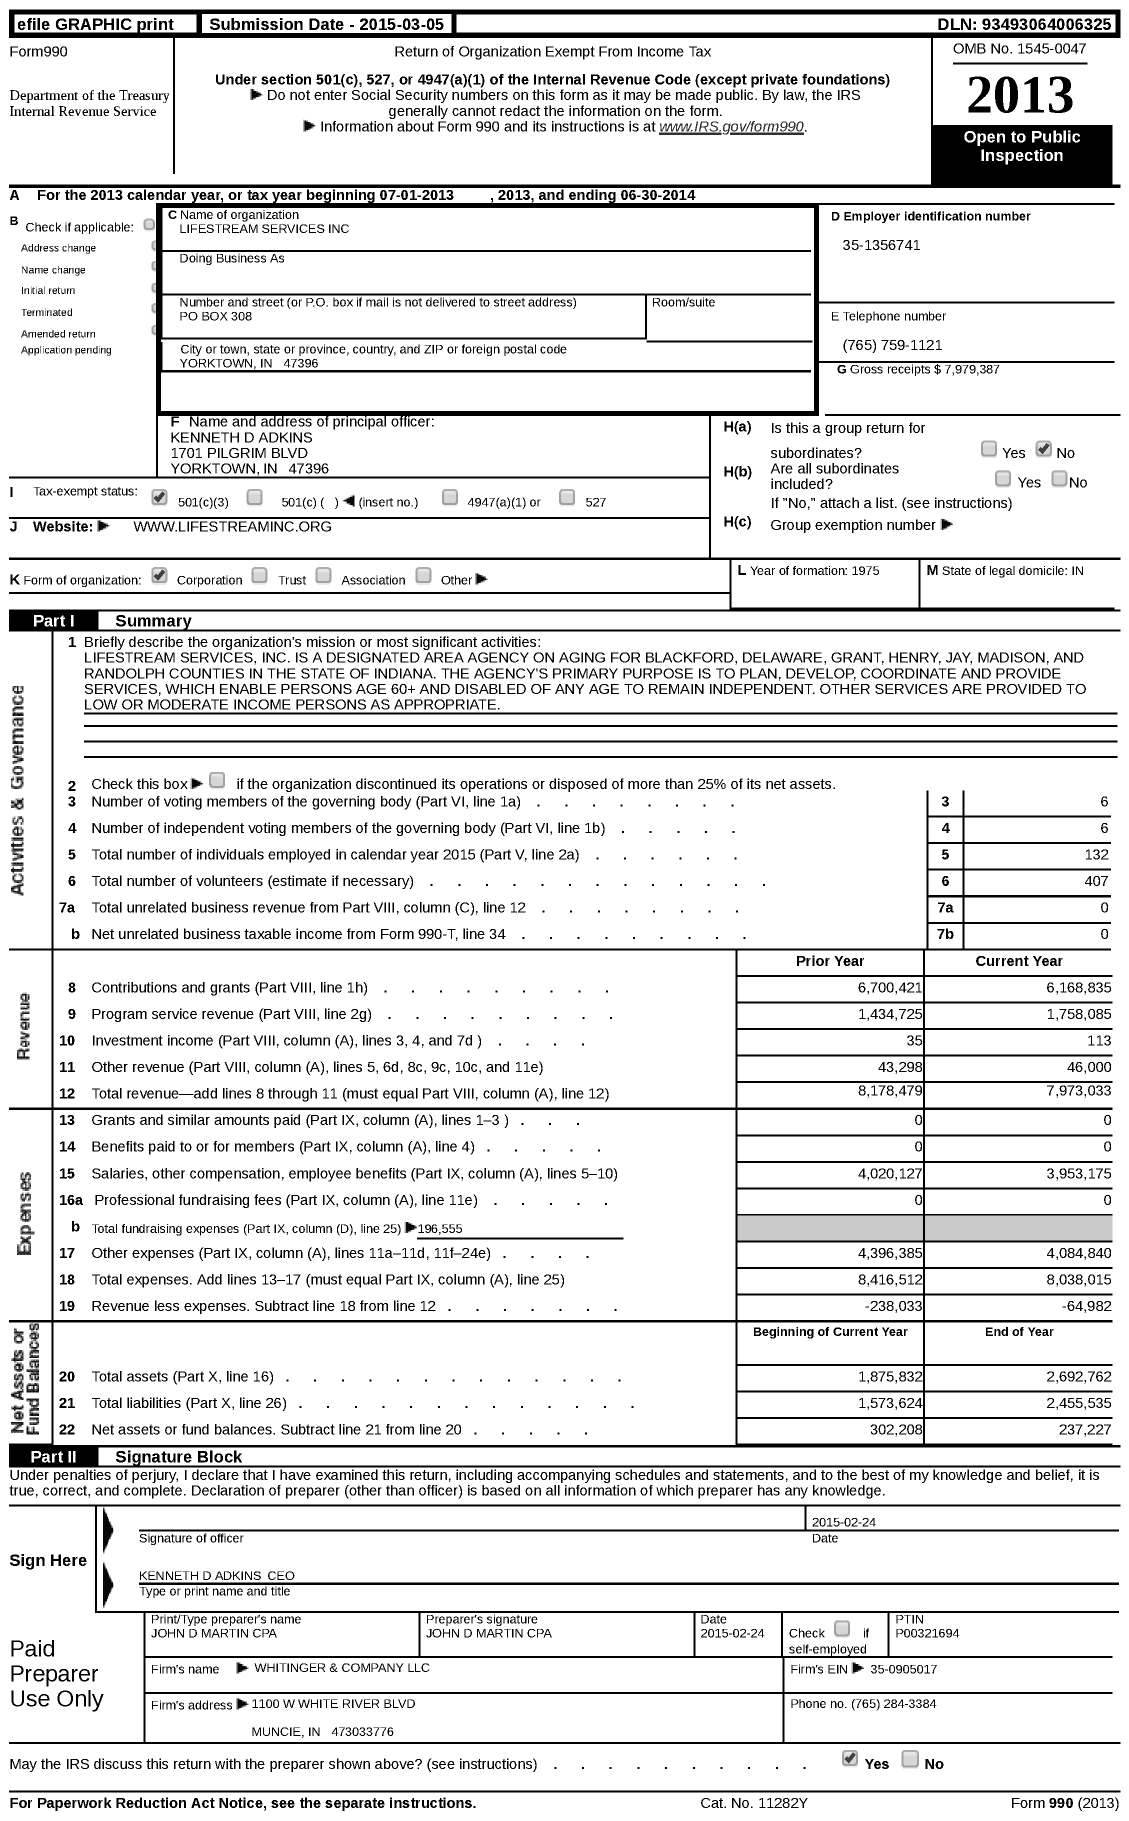 Image of first page of 2013 Form 990 for LifeStream Services